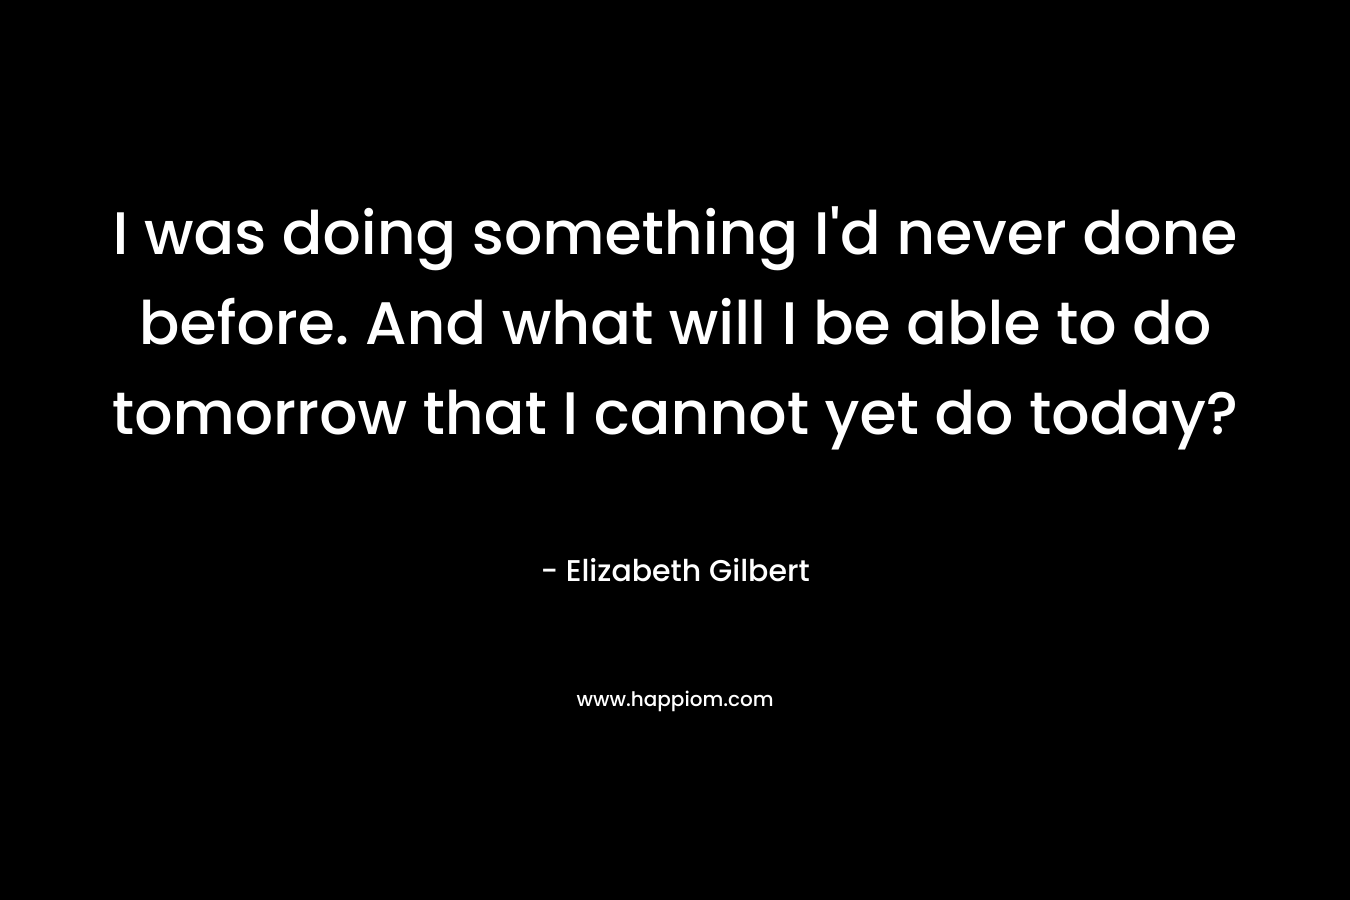 I was doing something I'd never done before. And what will I be able to do tomorrow that I cannot yet do today?